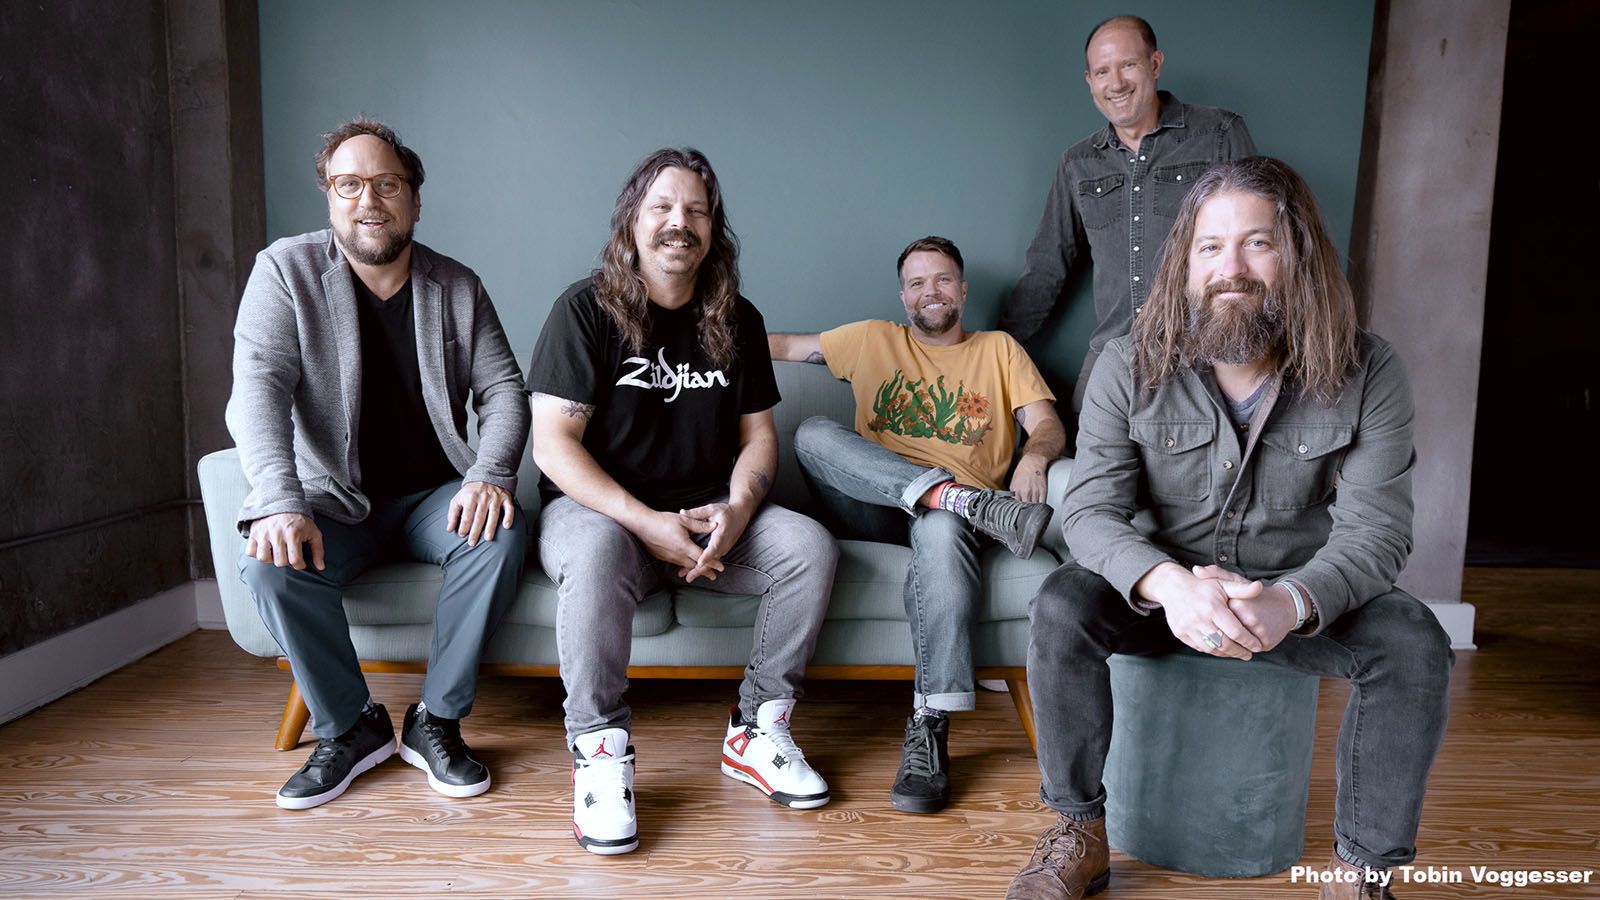 Greensky Bluegrass, from left, Anders Beck, Dave Bruzza, Michael Devol, Michael Arlen Bont, and Paul Hoffman, will be at Sweetwater Performance Pavilion on Tuesday, June 11.